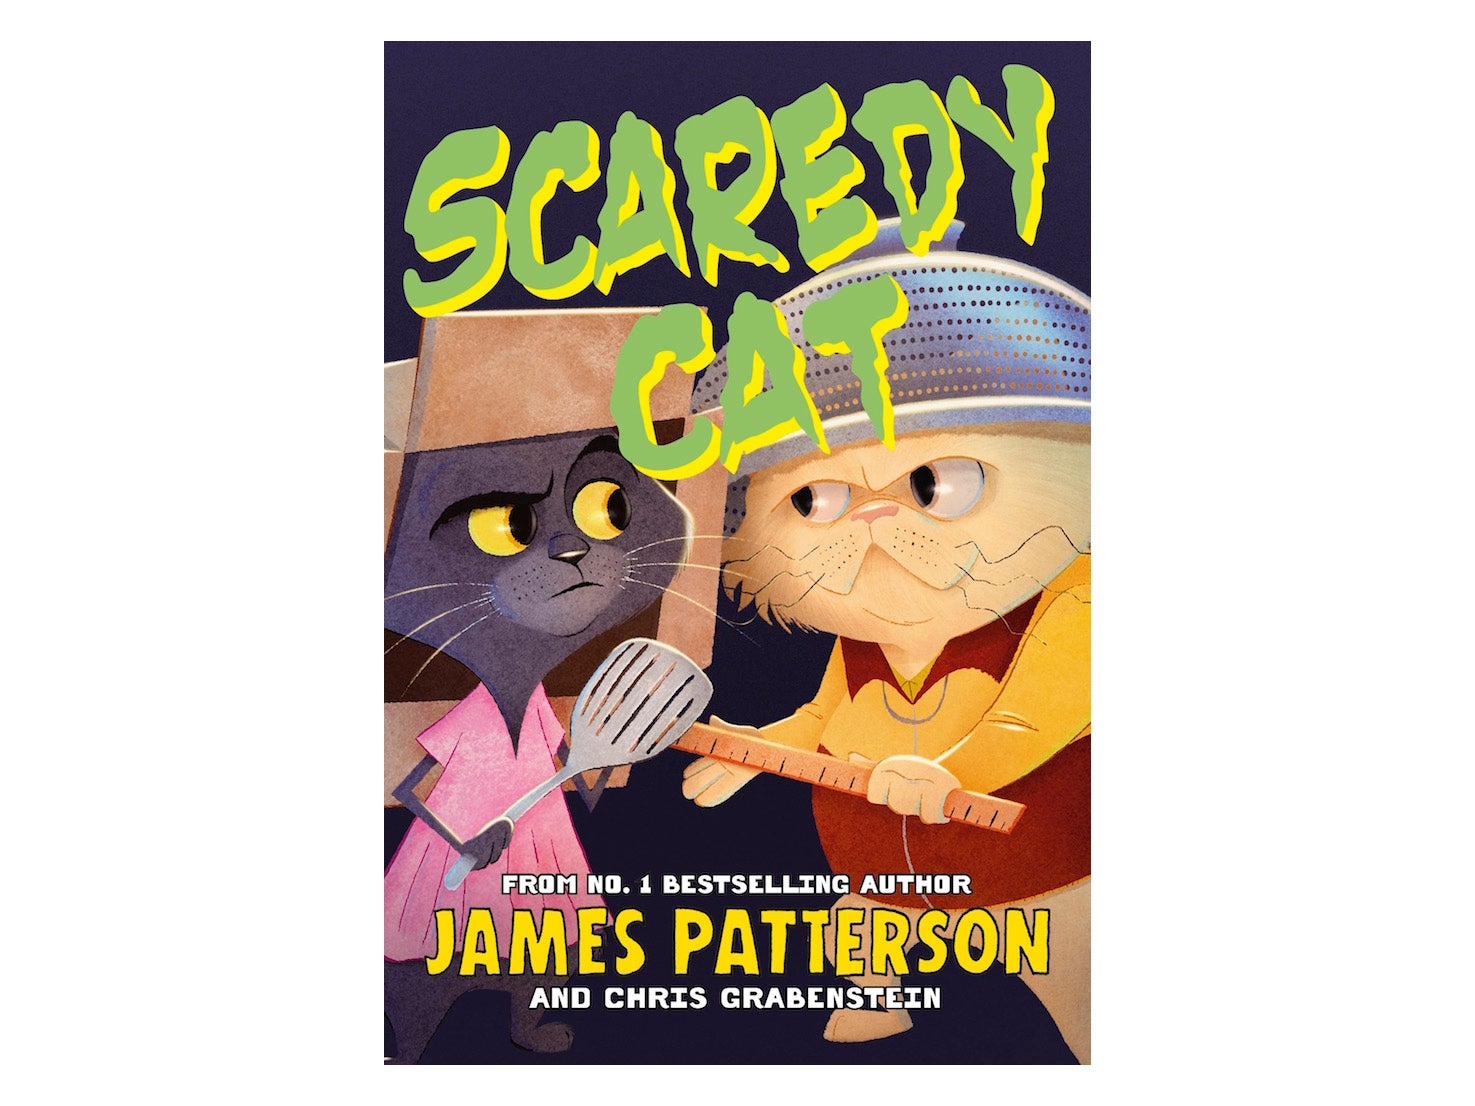 ‘Scaredy Cat’ by James Patterson and Chris Grabenstein.jpg